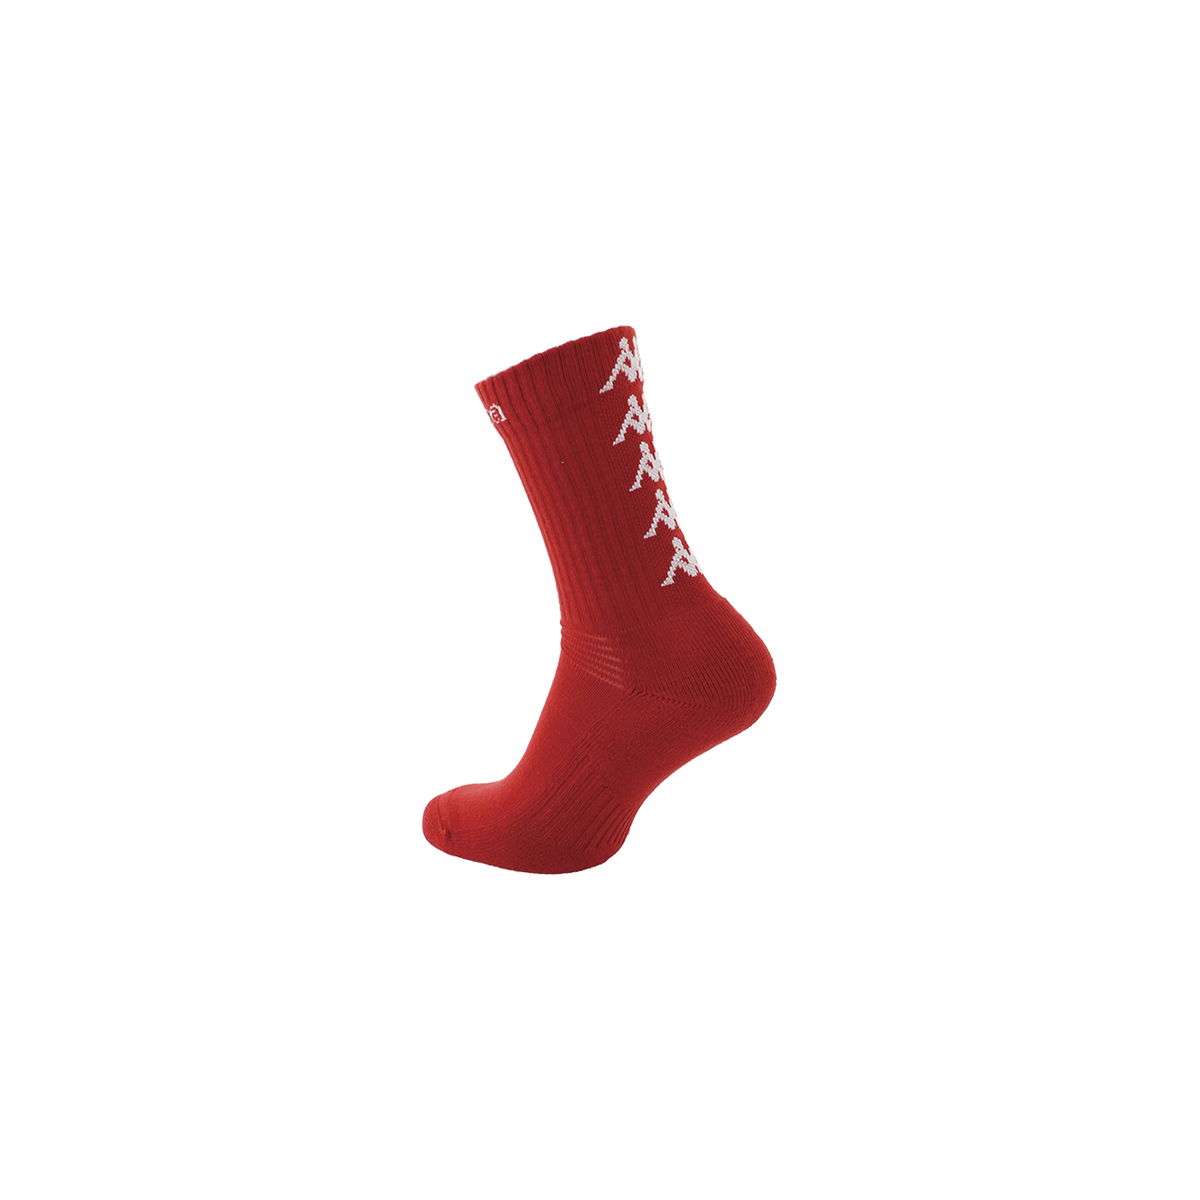 Chaussettes Multisport Eleno Rouge Homme - Image 1